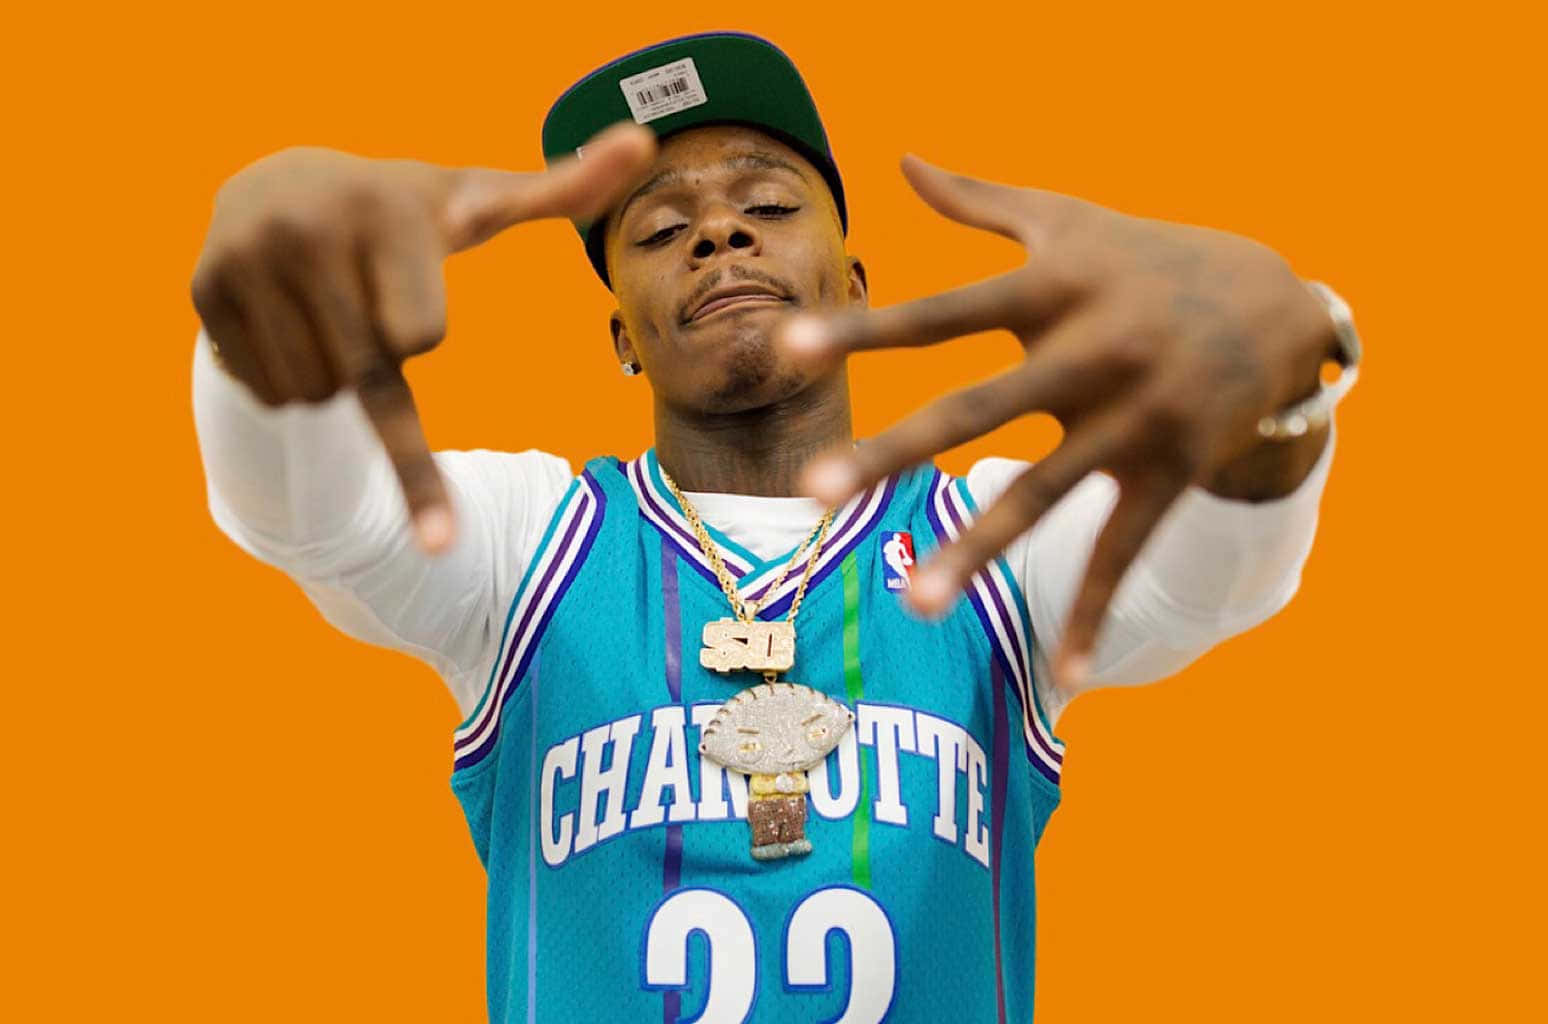 DaBaby strikes a pose during an event